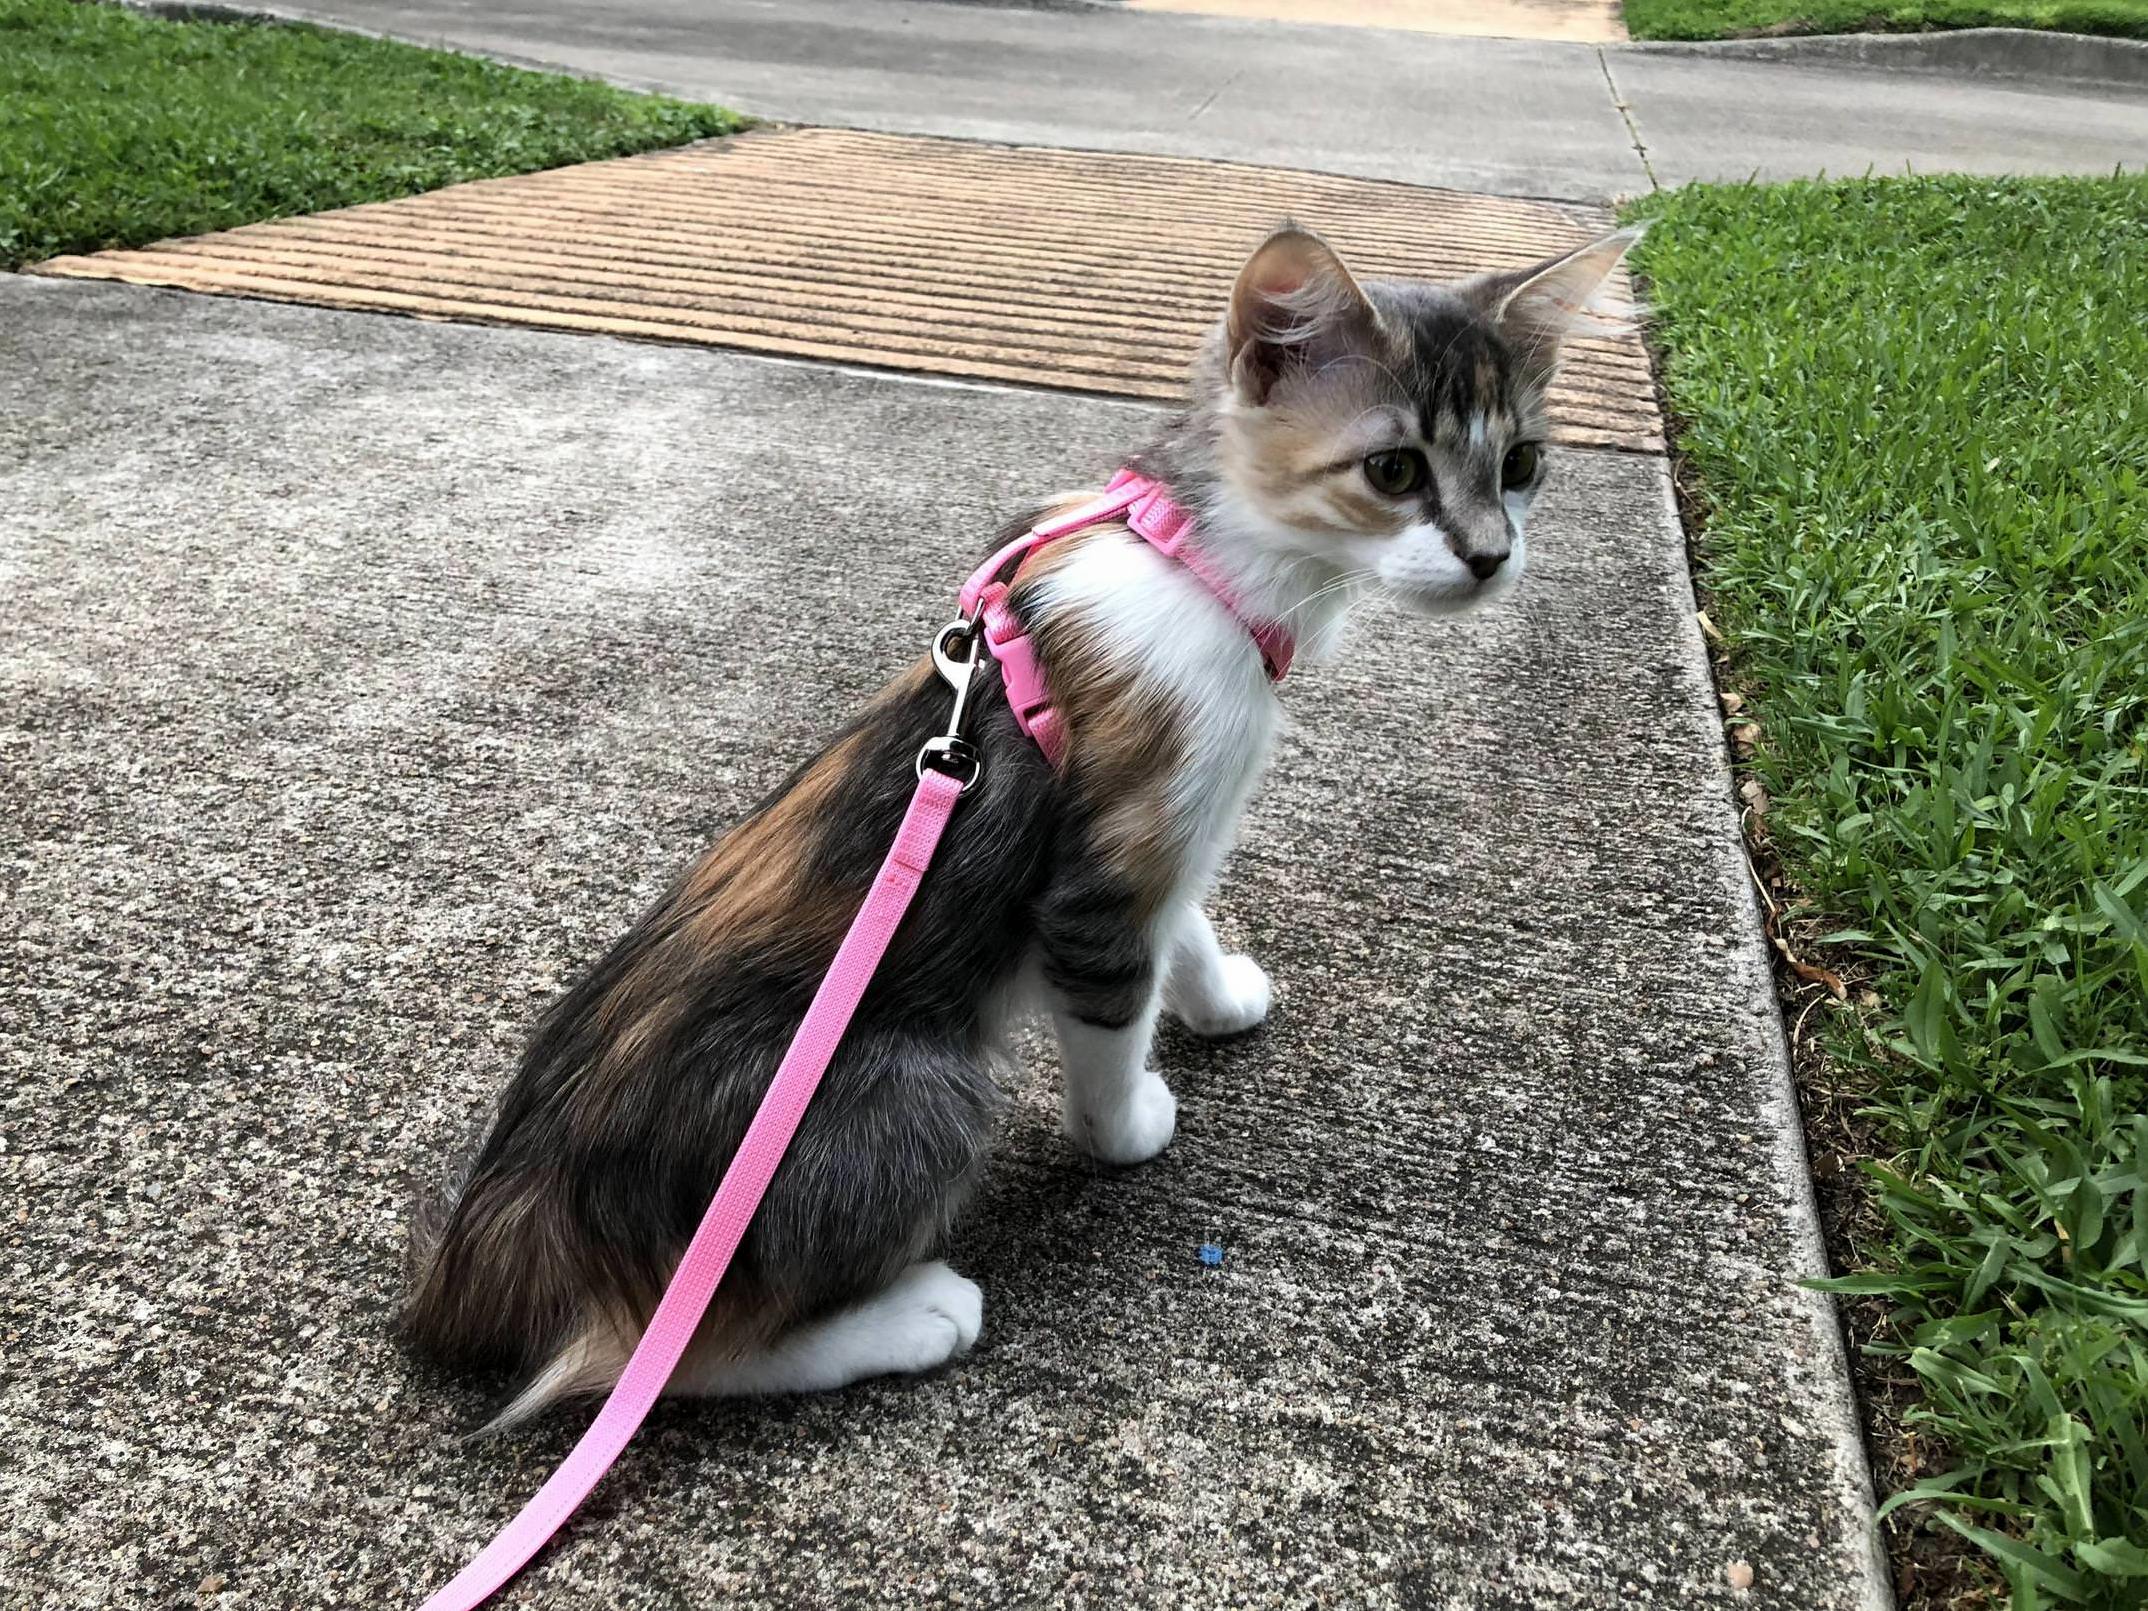 She kept wanting to follow me out the door so i took her on her first walk